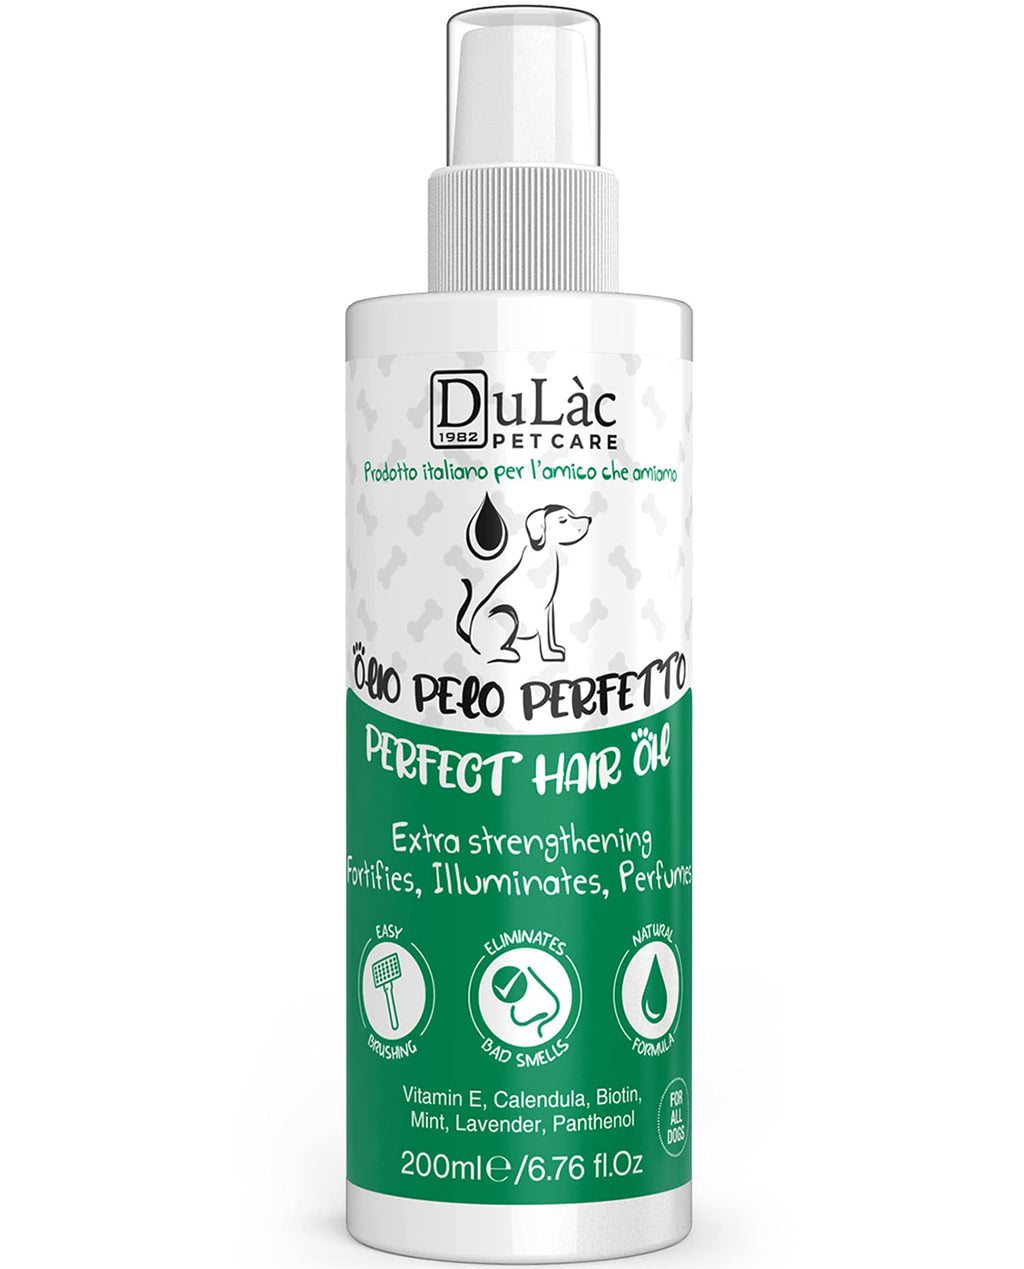 Dulàc Natural Dog Hair Spray 3 in 1: Deodorant, Conditioner and Polisher, Lavender and Mint Fragrance, enriched with Vitamin E, Calendula, Panthenol, Biotin - PawsPlanet Australia